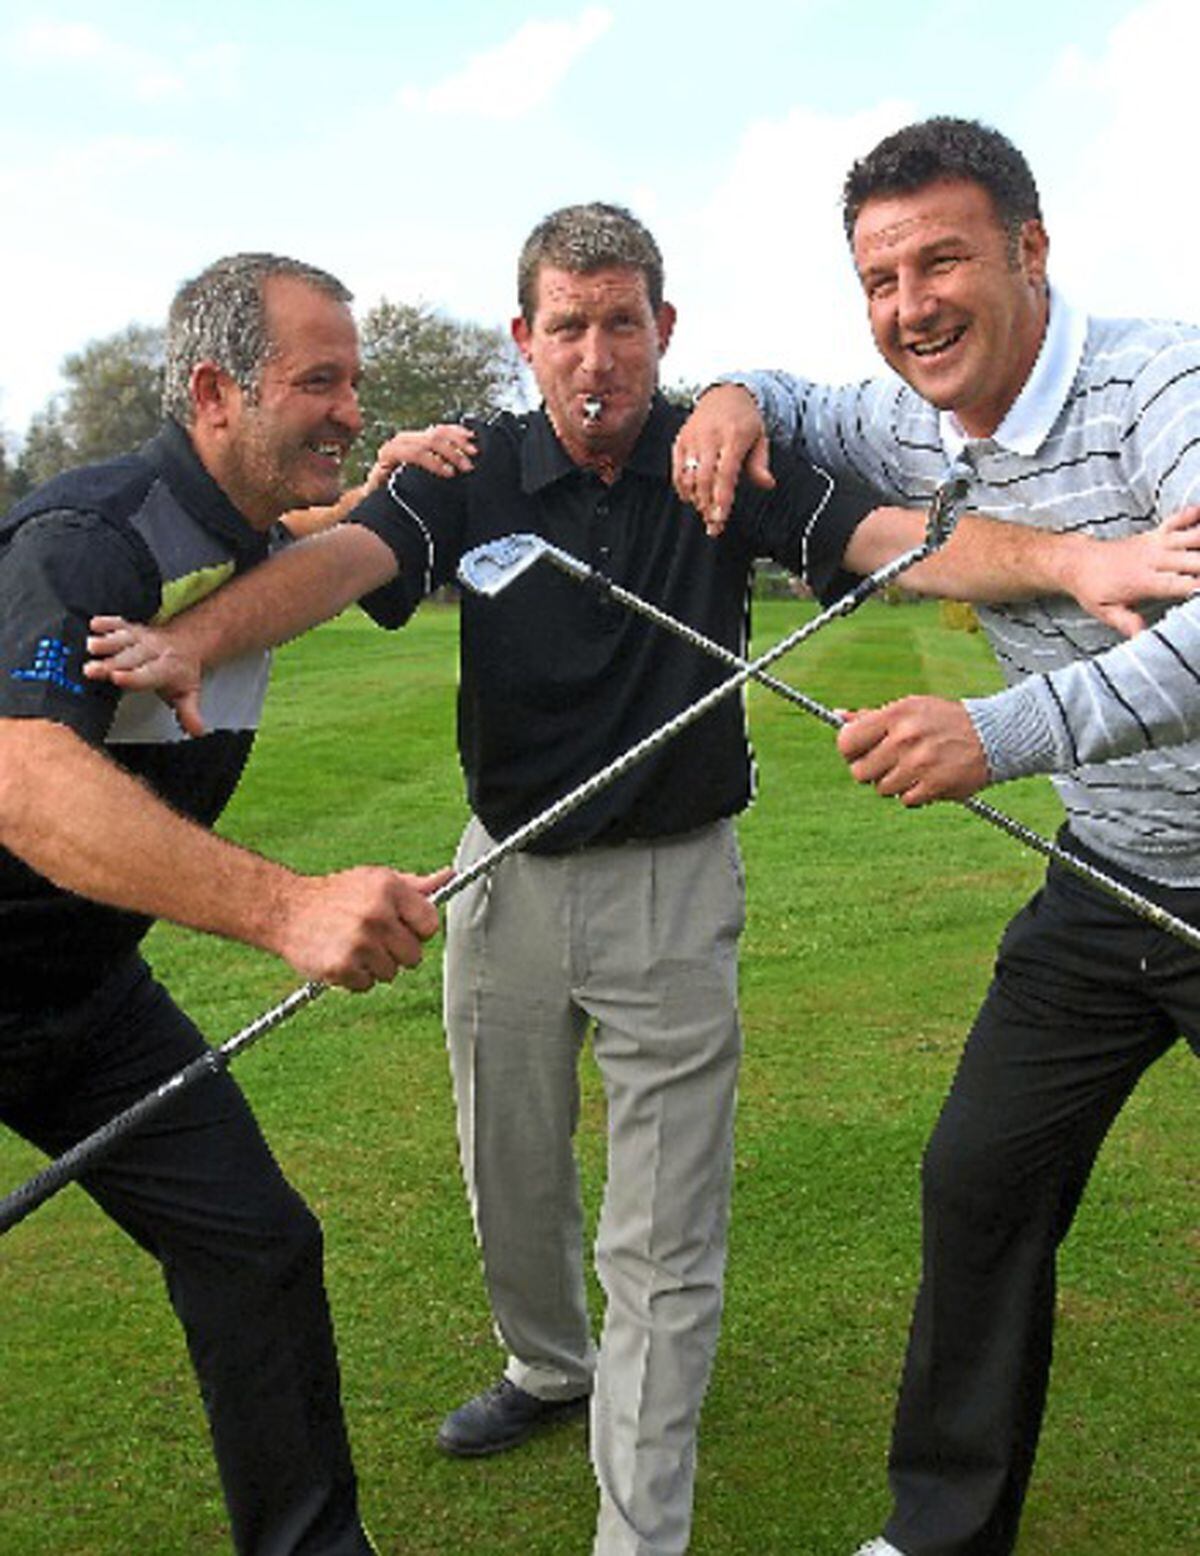 Separated by Andy Mutch on the golf course in 2007